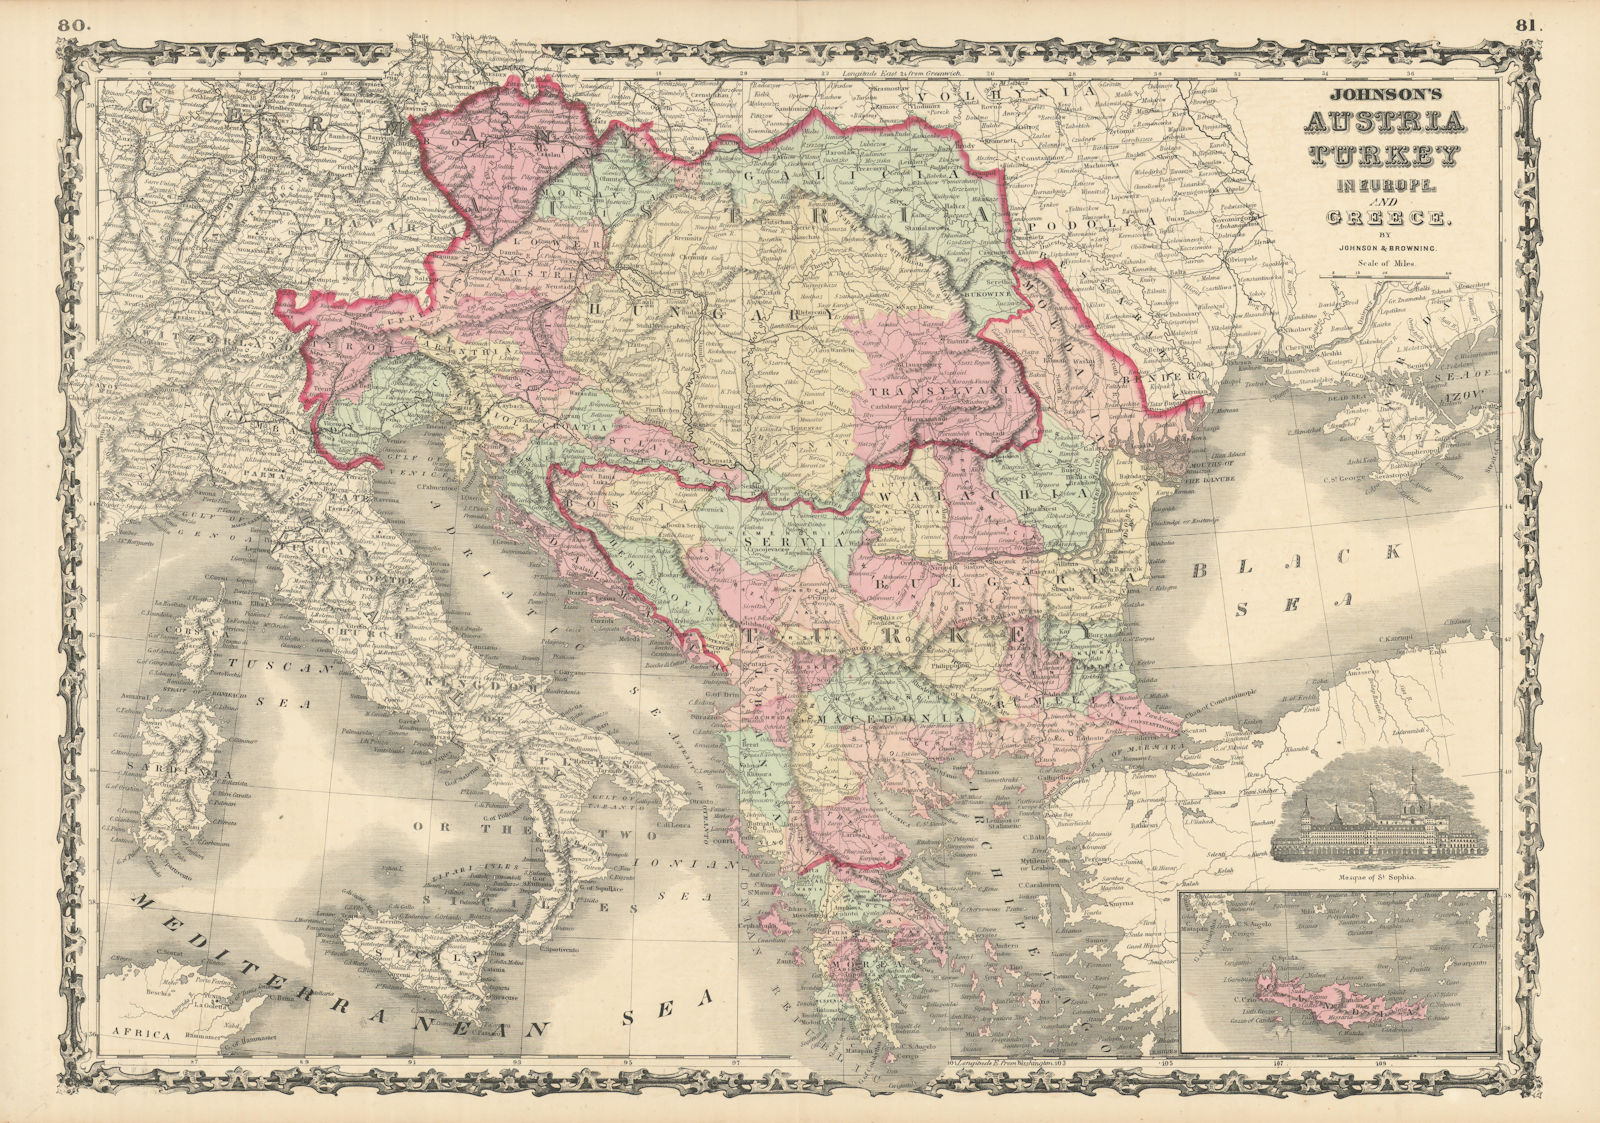 Associate Product Johnson's Austria, Turkey in Europe and Greece. Balkans Hungary 1861 old map